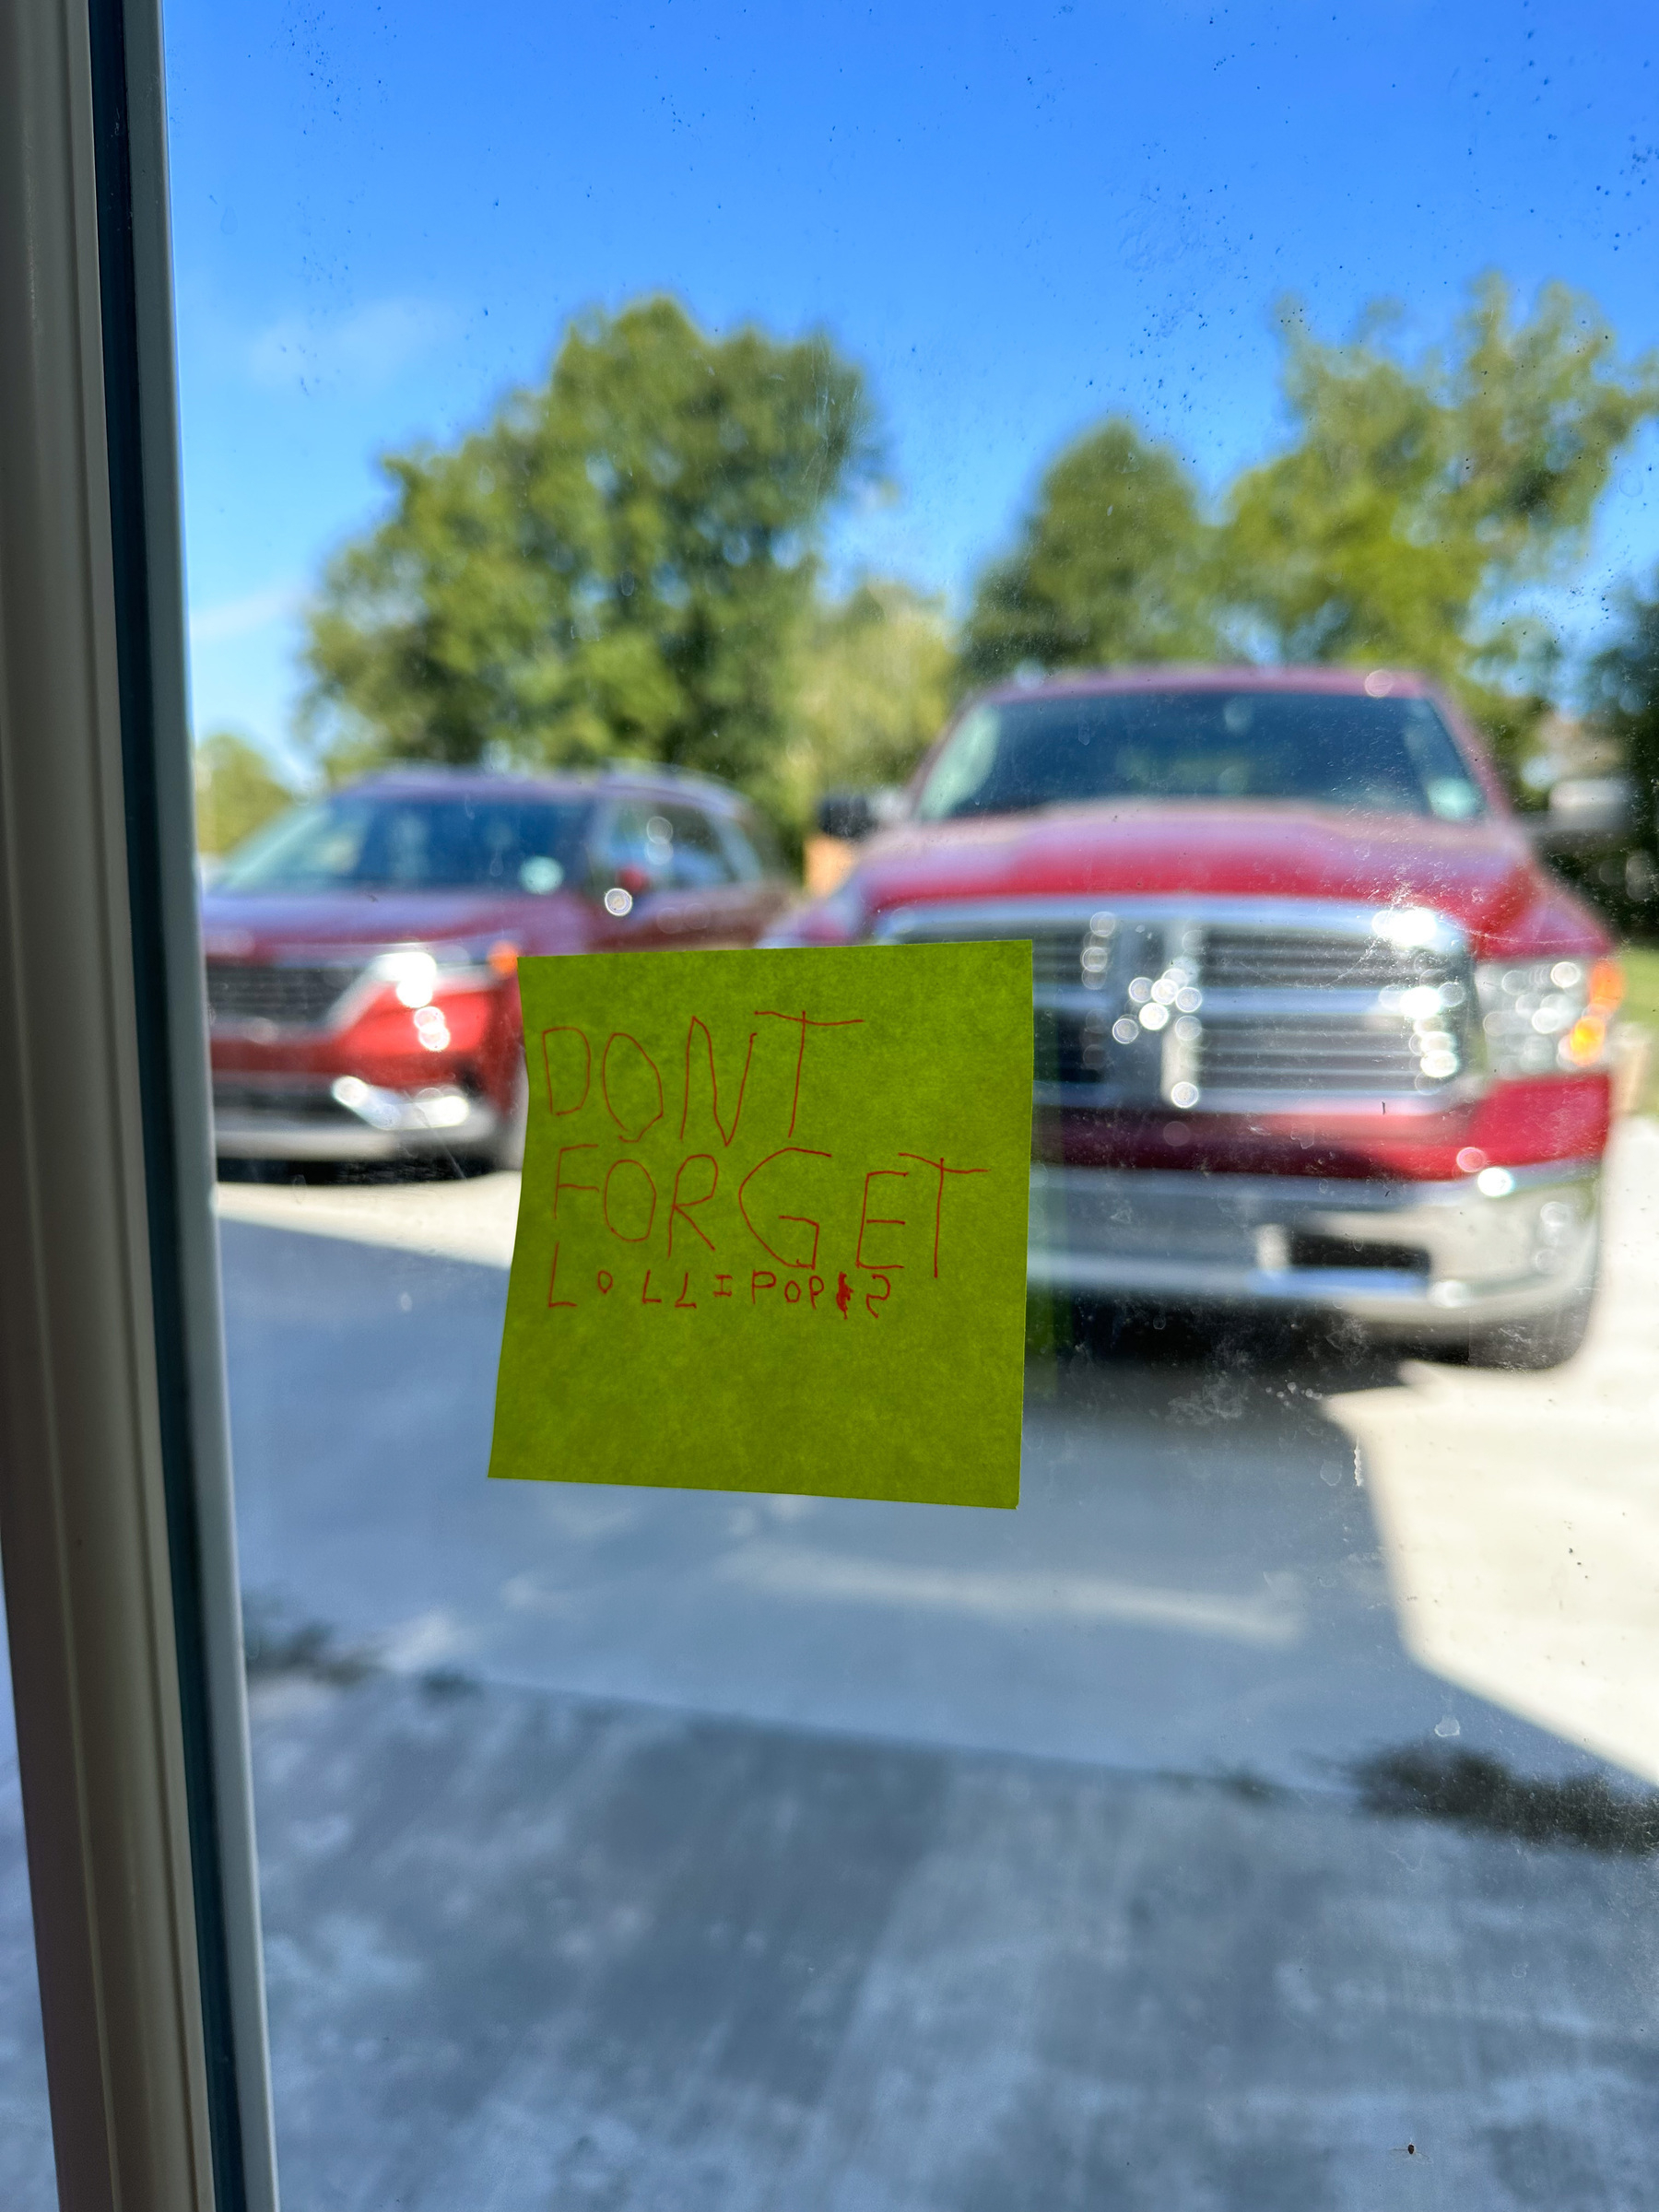 A sticky note on a window/door that says, “Don’t forget lollipops”